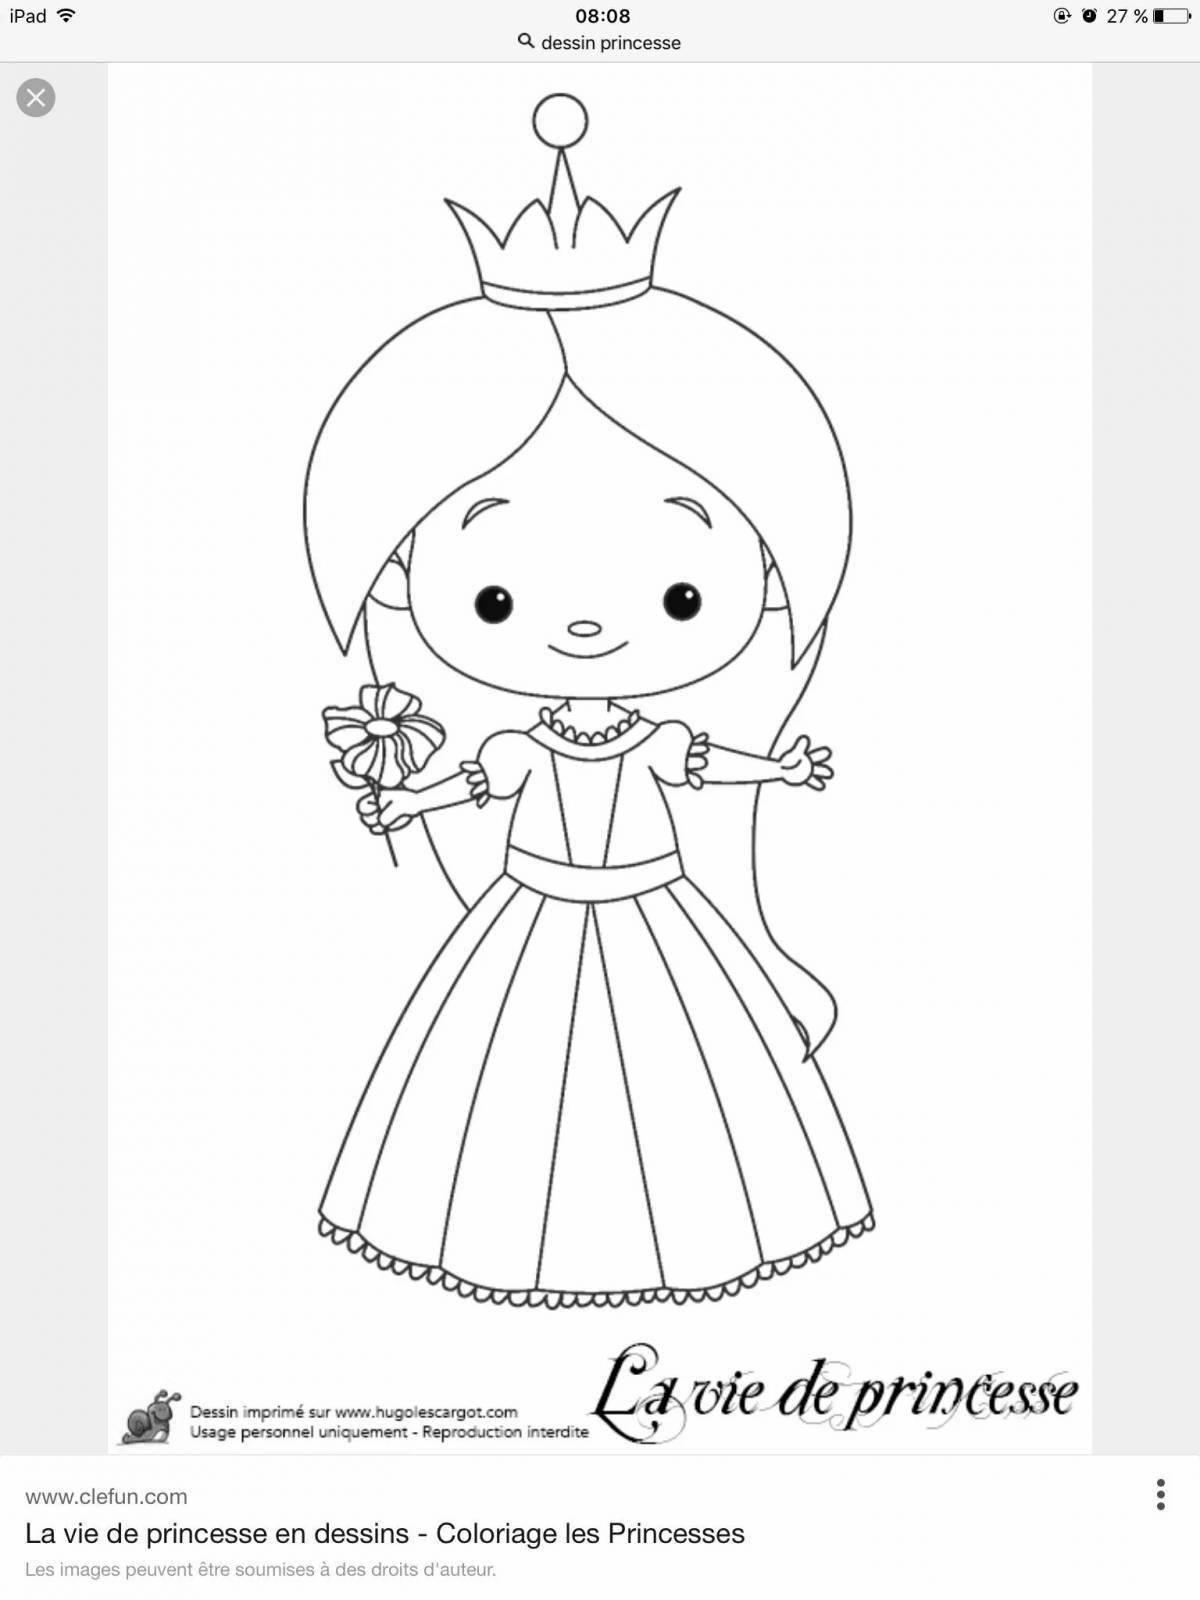 Great princess coloring pages for girls 4-5 years old